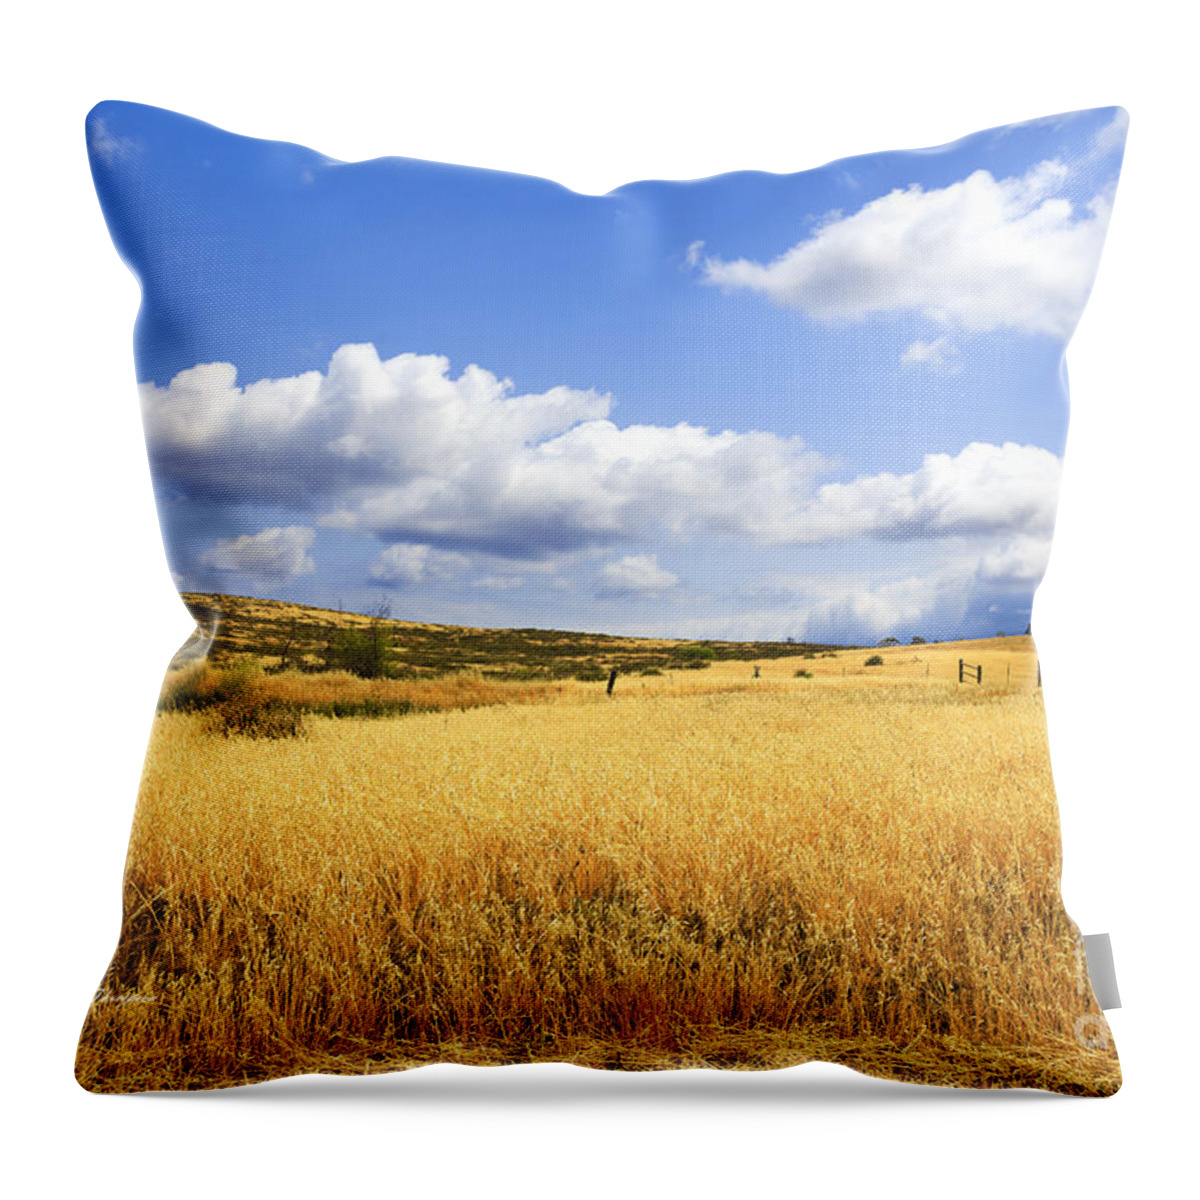 Lake Skinner Throw Pillow featuring the photograph Lake Skinner Regional Park Open-Space District by Richard J Thompson 